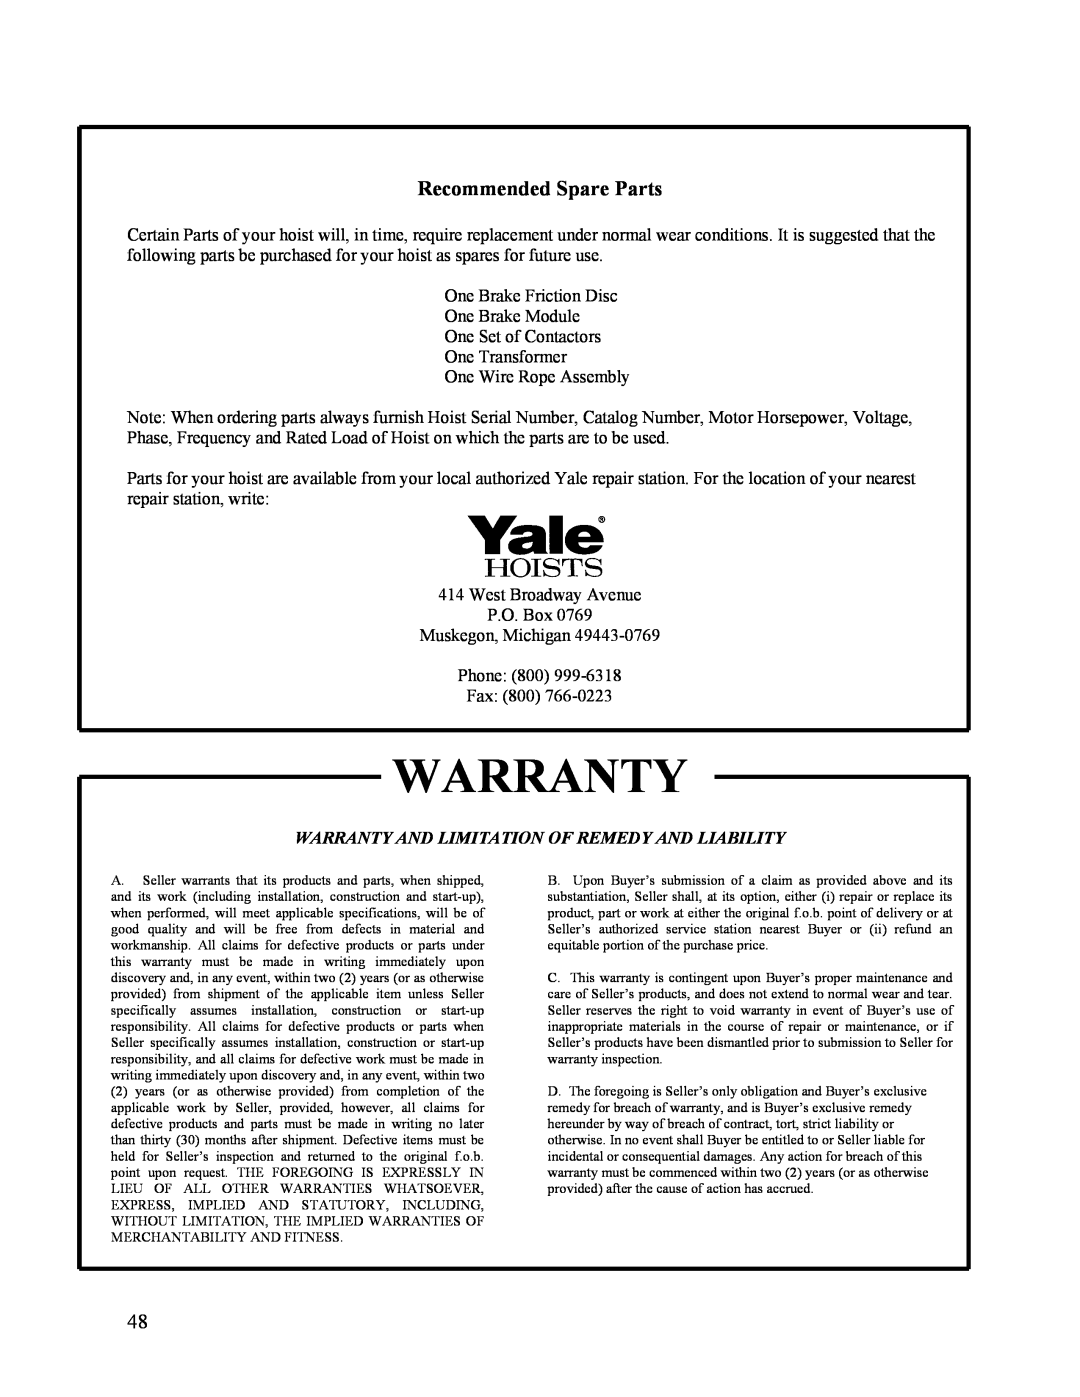 Yale 11353395D manual Recommended Spare Parts, Warranty And Limitation Of Remedy And Liability 